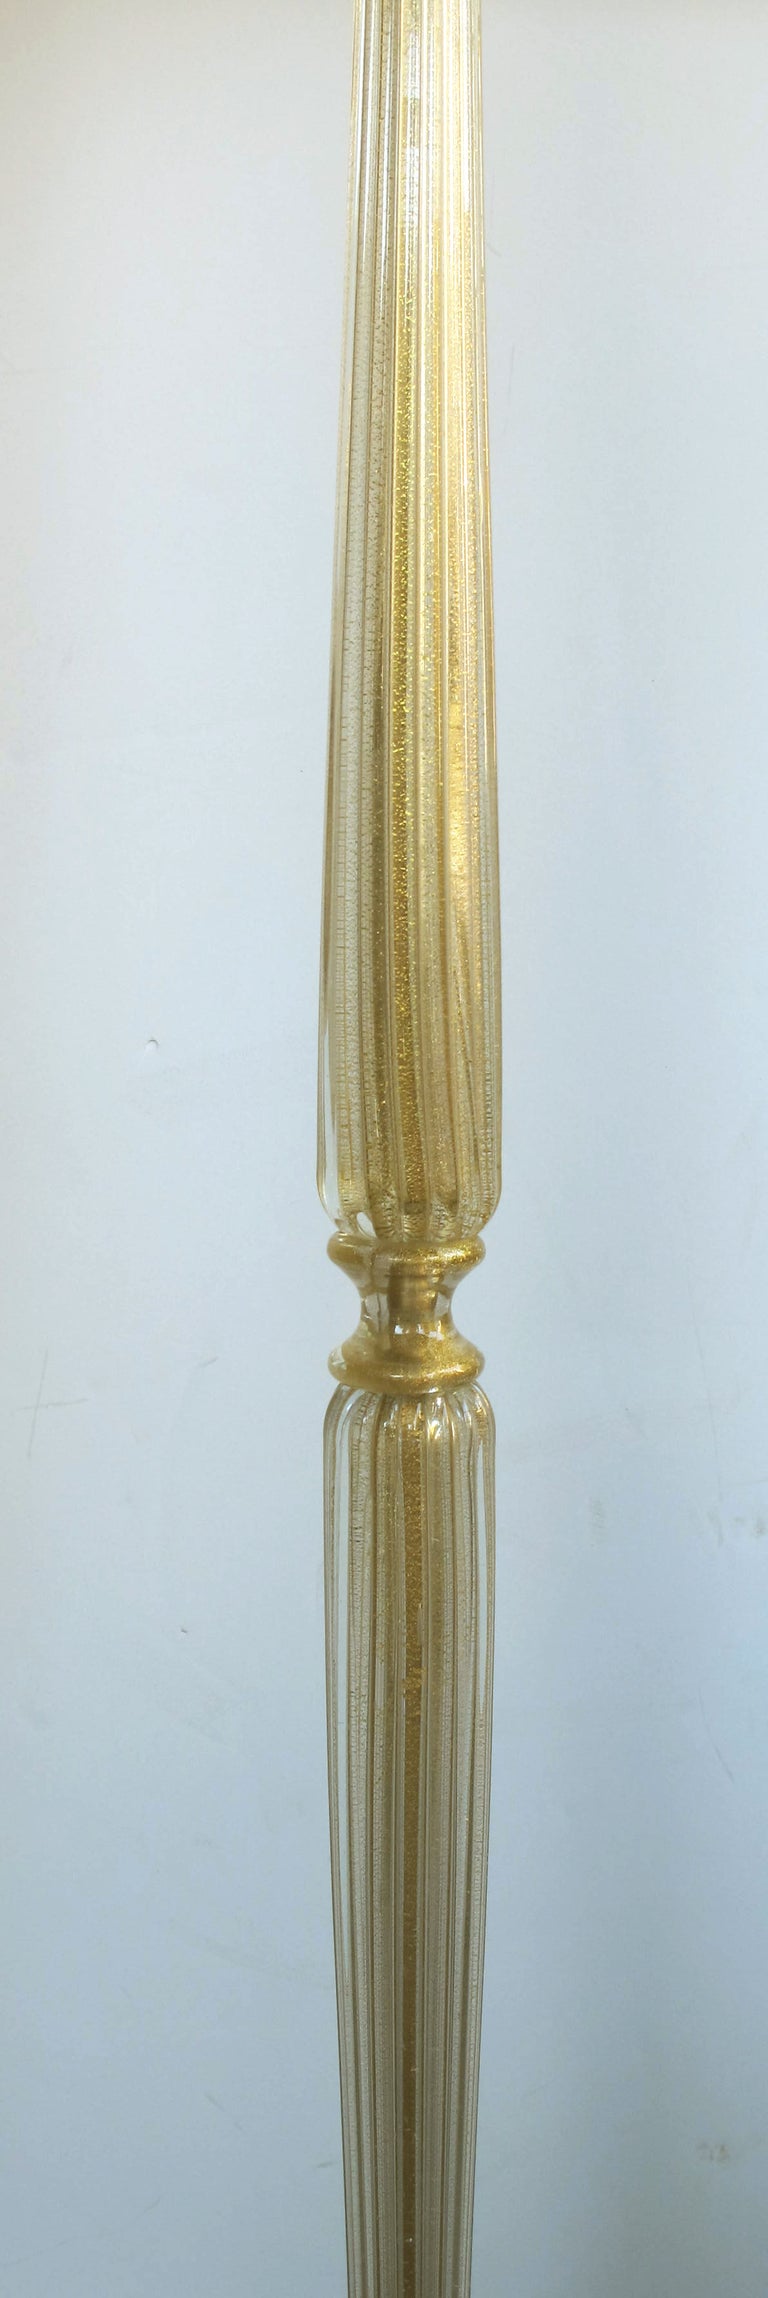 A Murano Gold Aventurine Art Glass Floor Lamp; by Marbro Lamp Co, Los Angeles 1